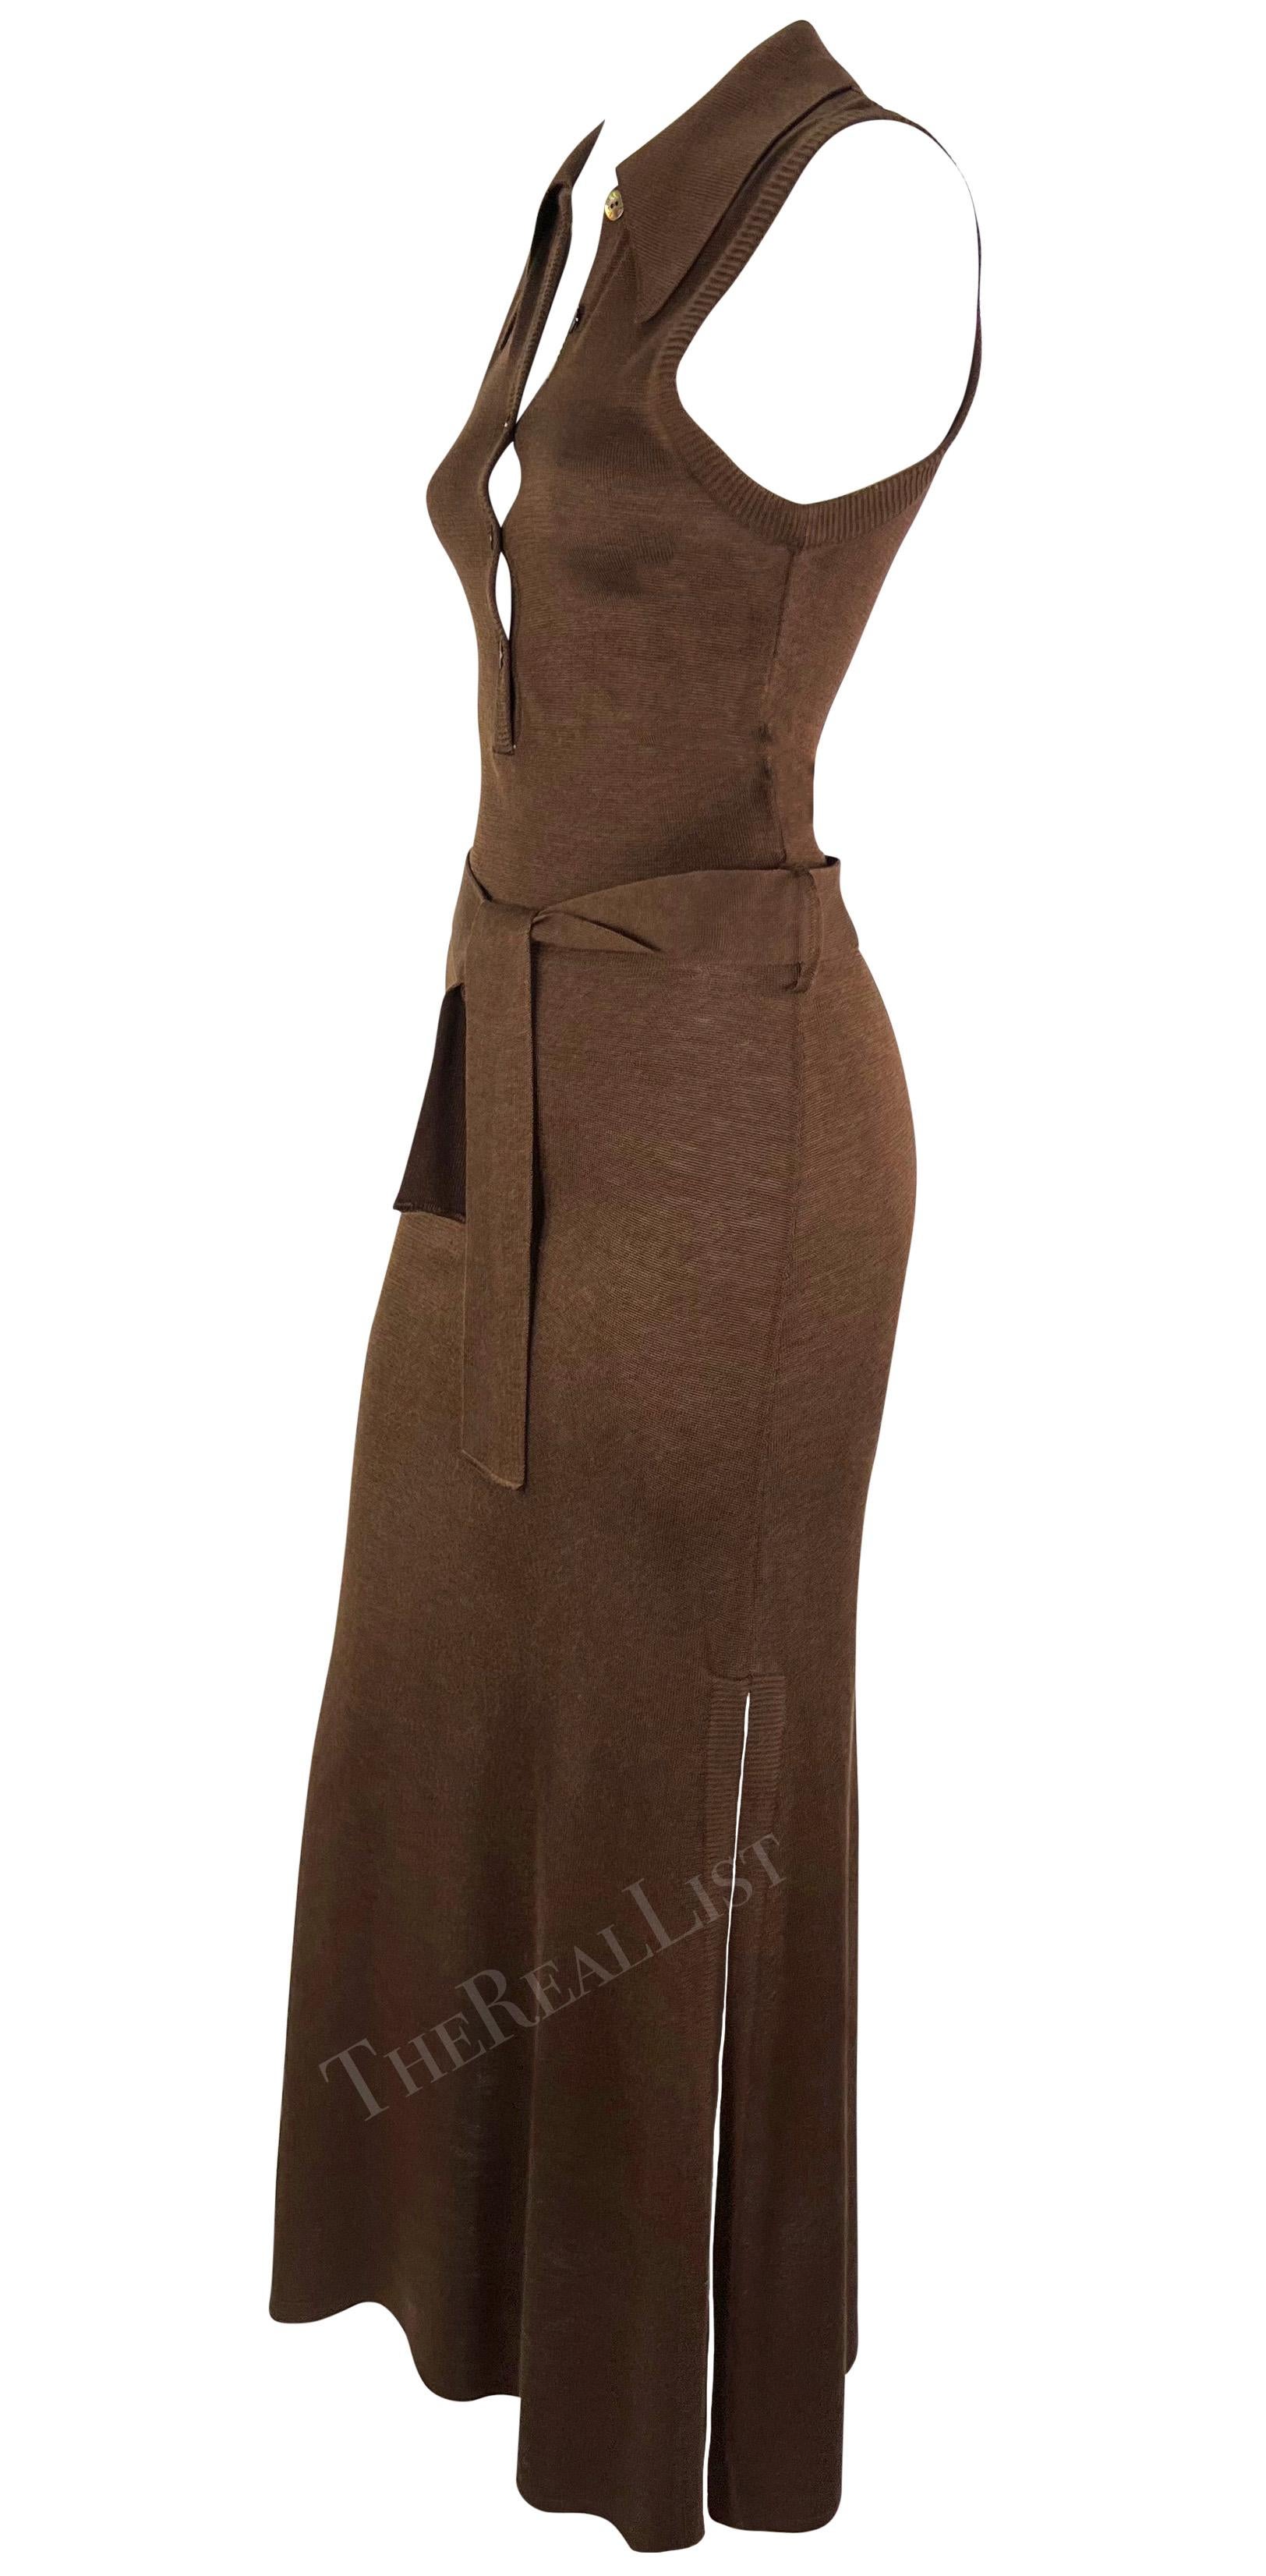 S/S 1996 Dolce & Gabbana Runway Brown Knit Bodycon Belted Maxi Collared Dress For Sale 1